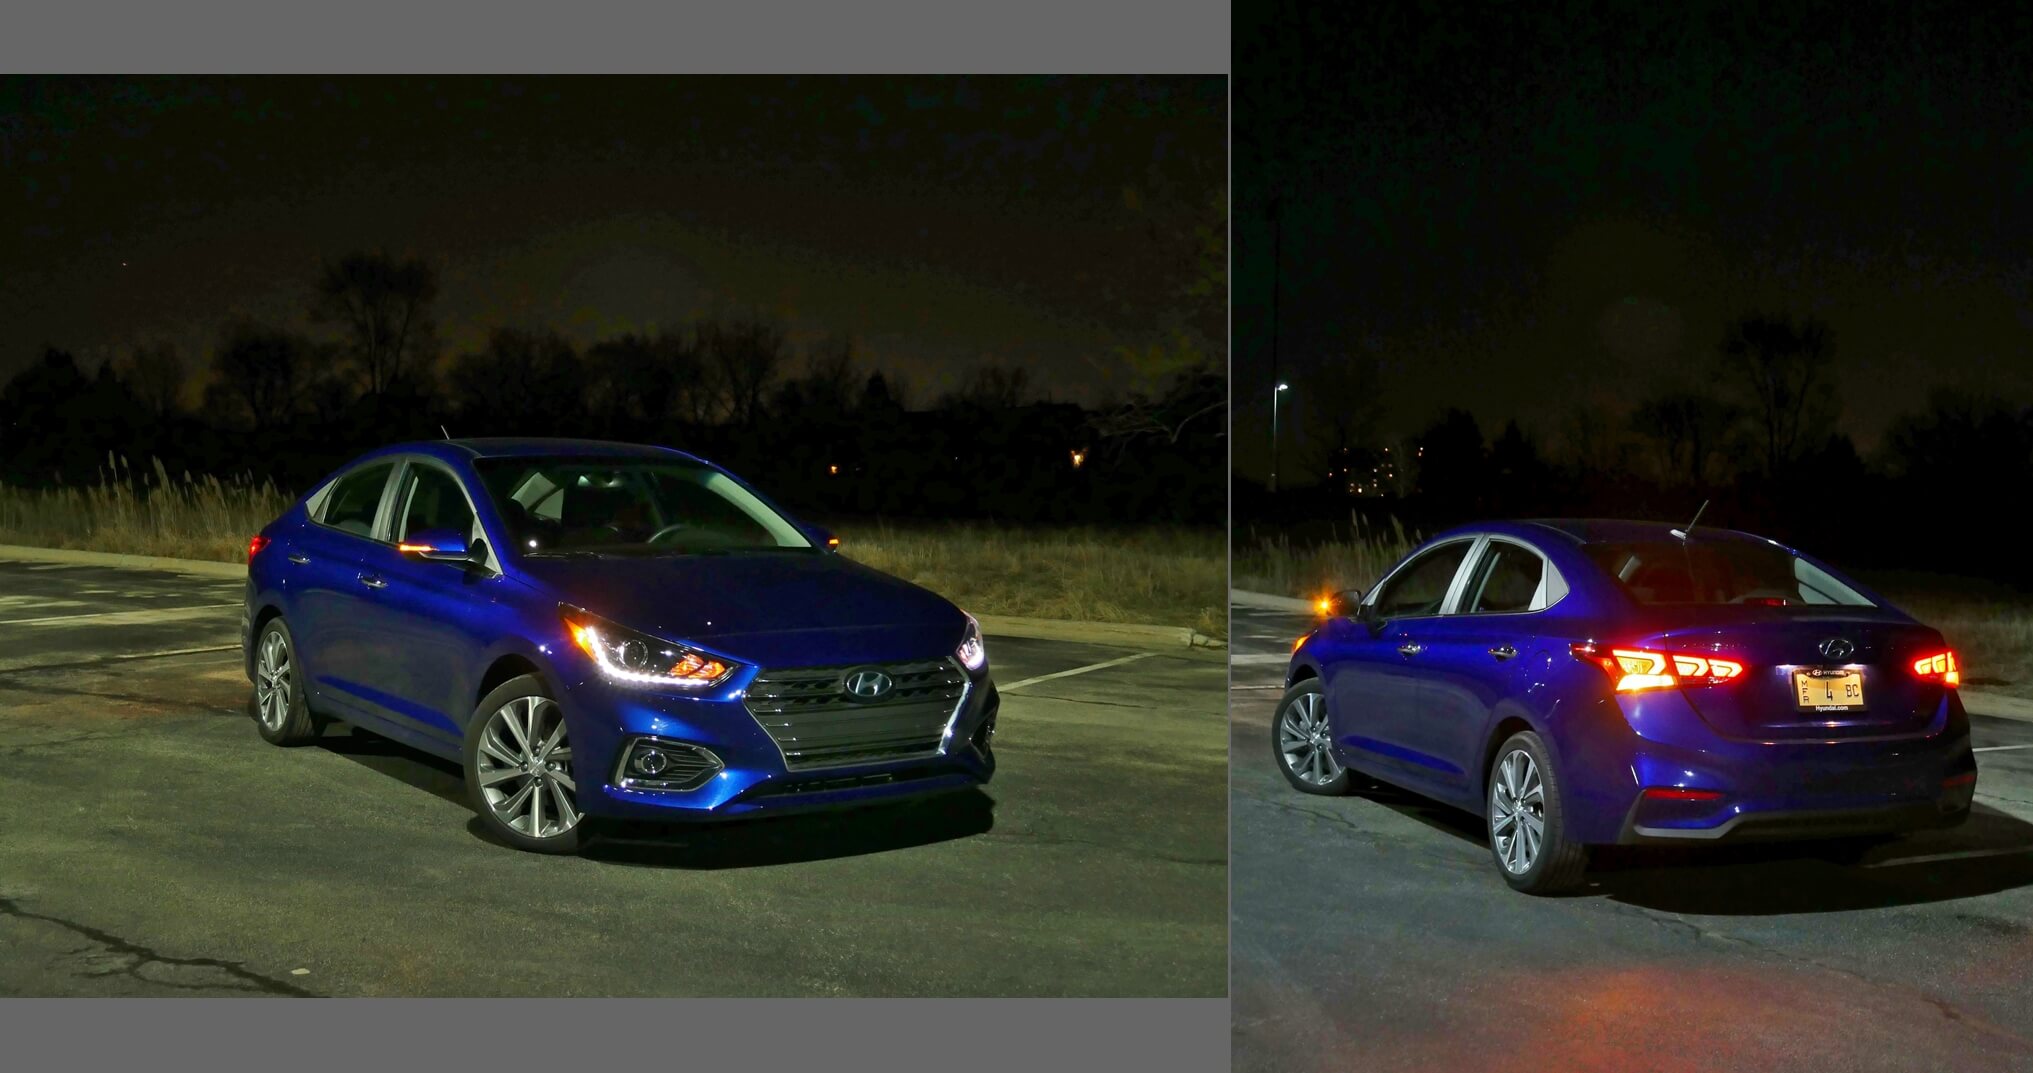 2018 Hyundai Accent Limited: nautical at night in Admiral Blue, Bridget's favorite color.